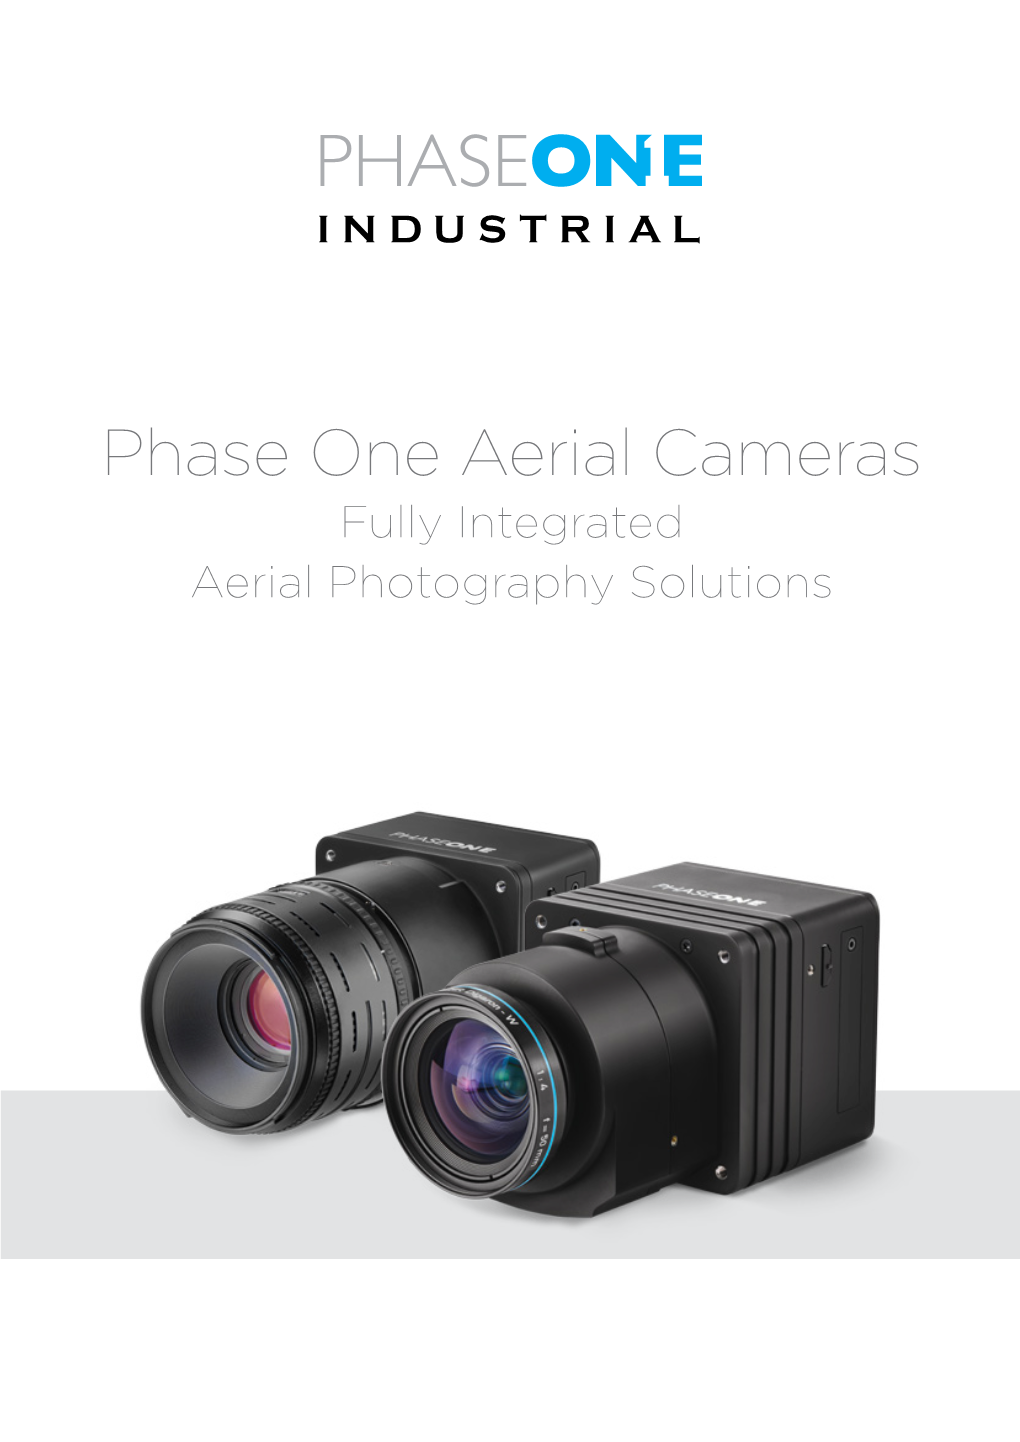 Phase One Aerial Camera Systems Applications